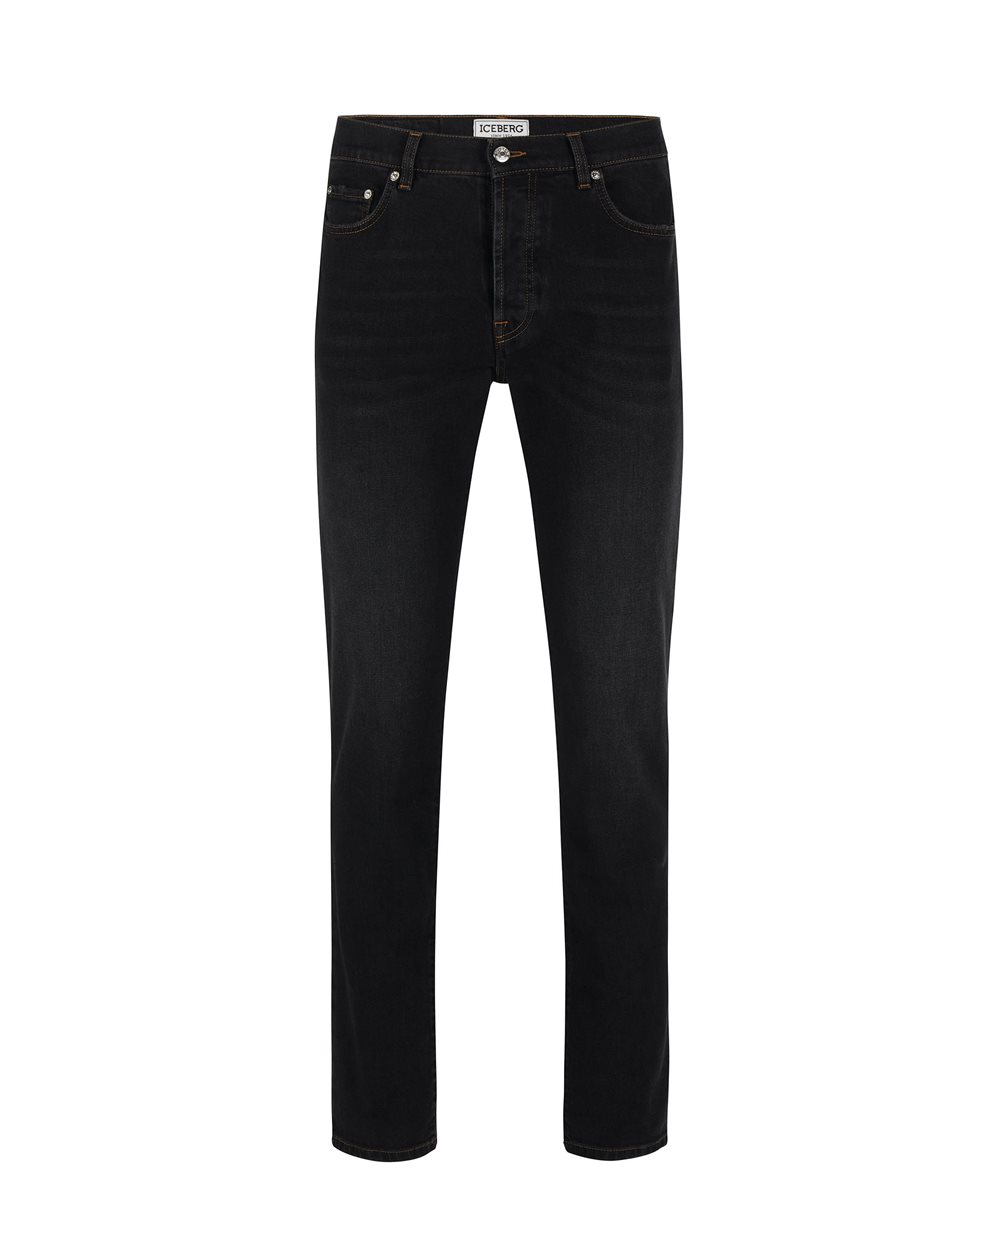 Classic 5-pocket blue jeans - Trousers | Iceberg - Official Website